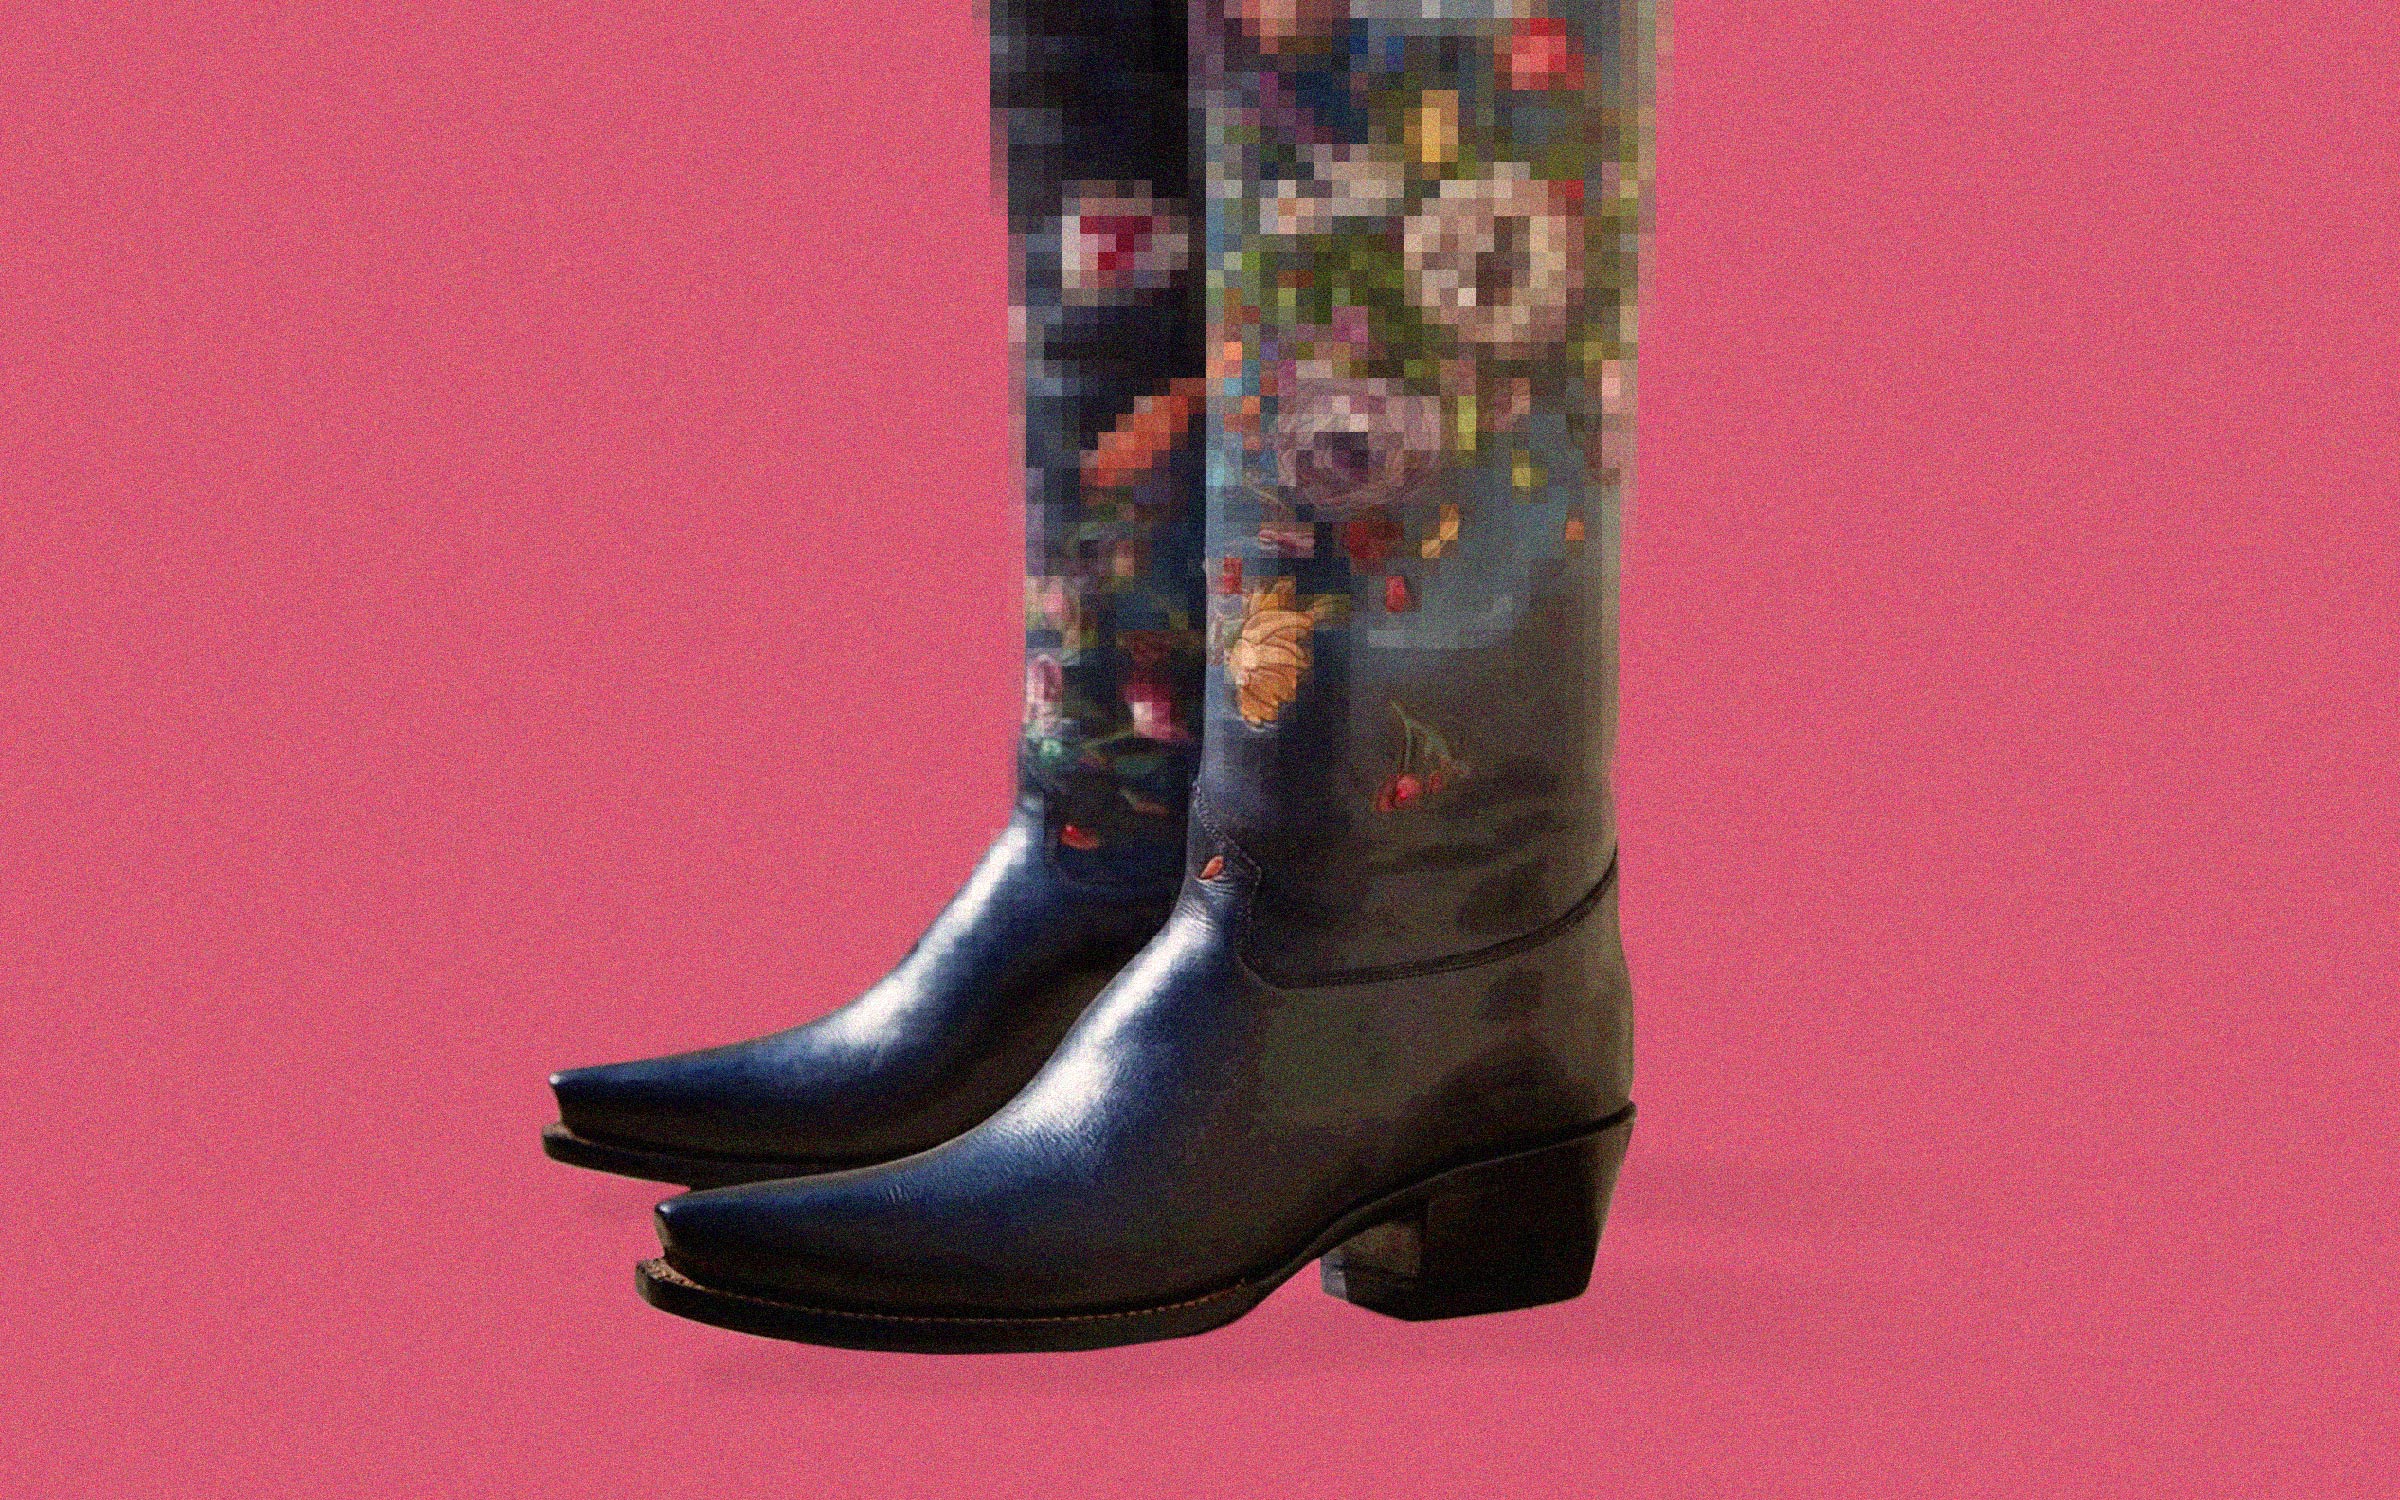 Rocketbuster Creates Cowboy Boots With a Little Help From AI